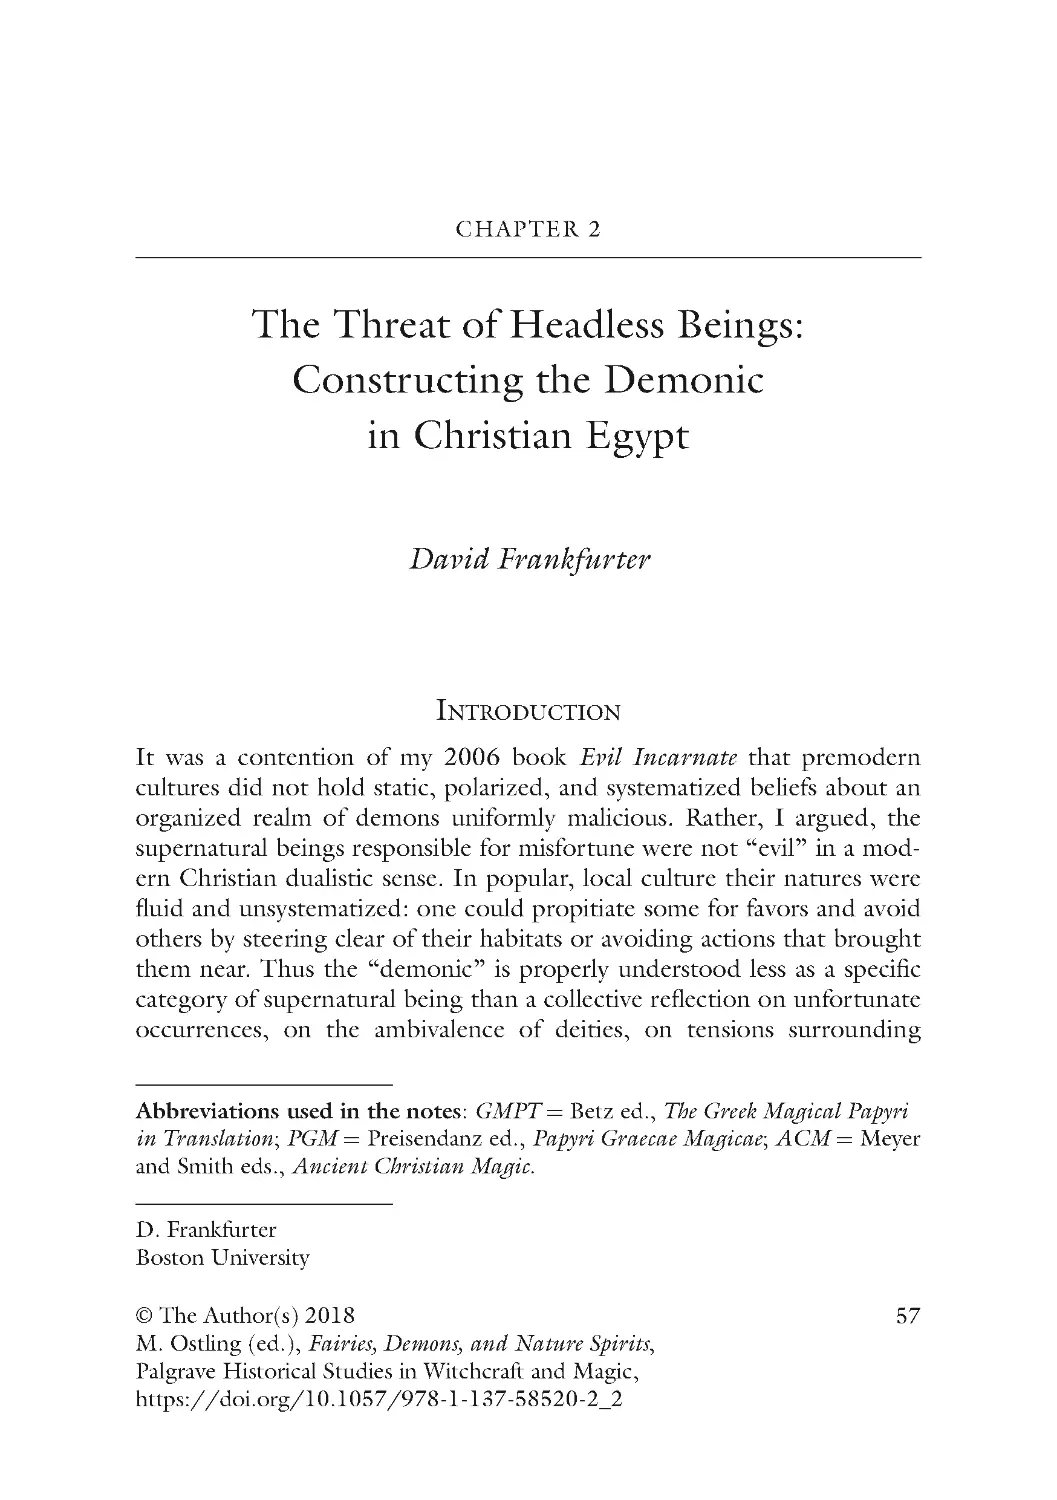 Chapter 2 The Threat of Headless Beings: Constructing the Demonic in Christian Egypt